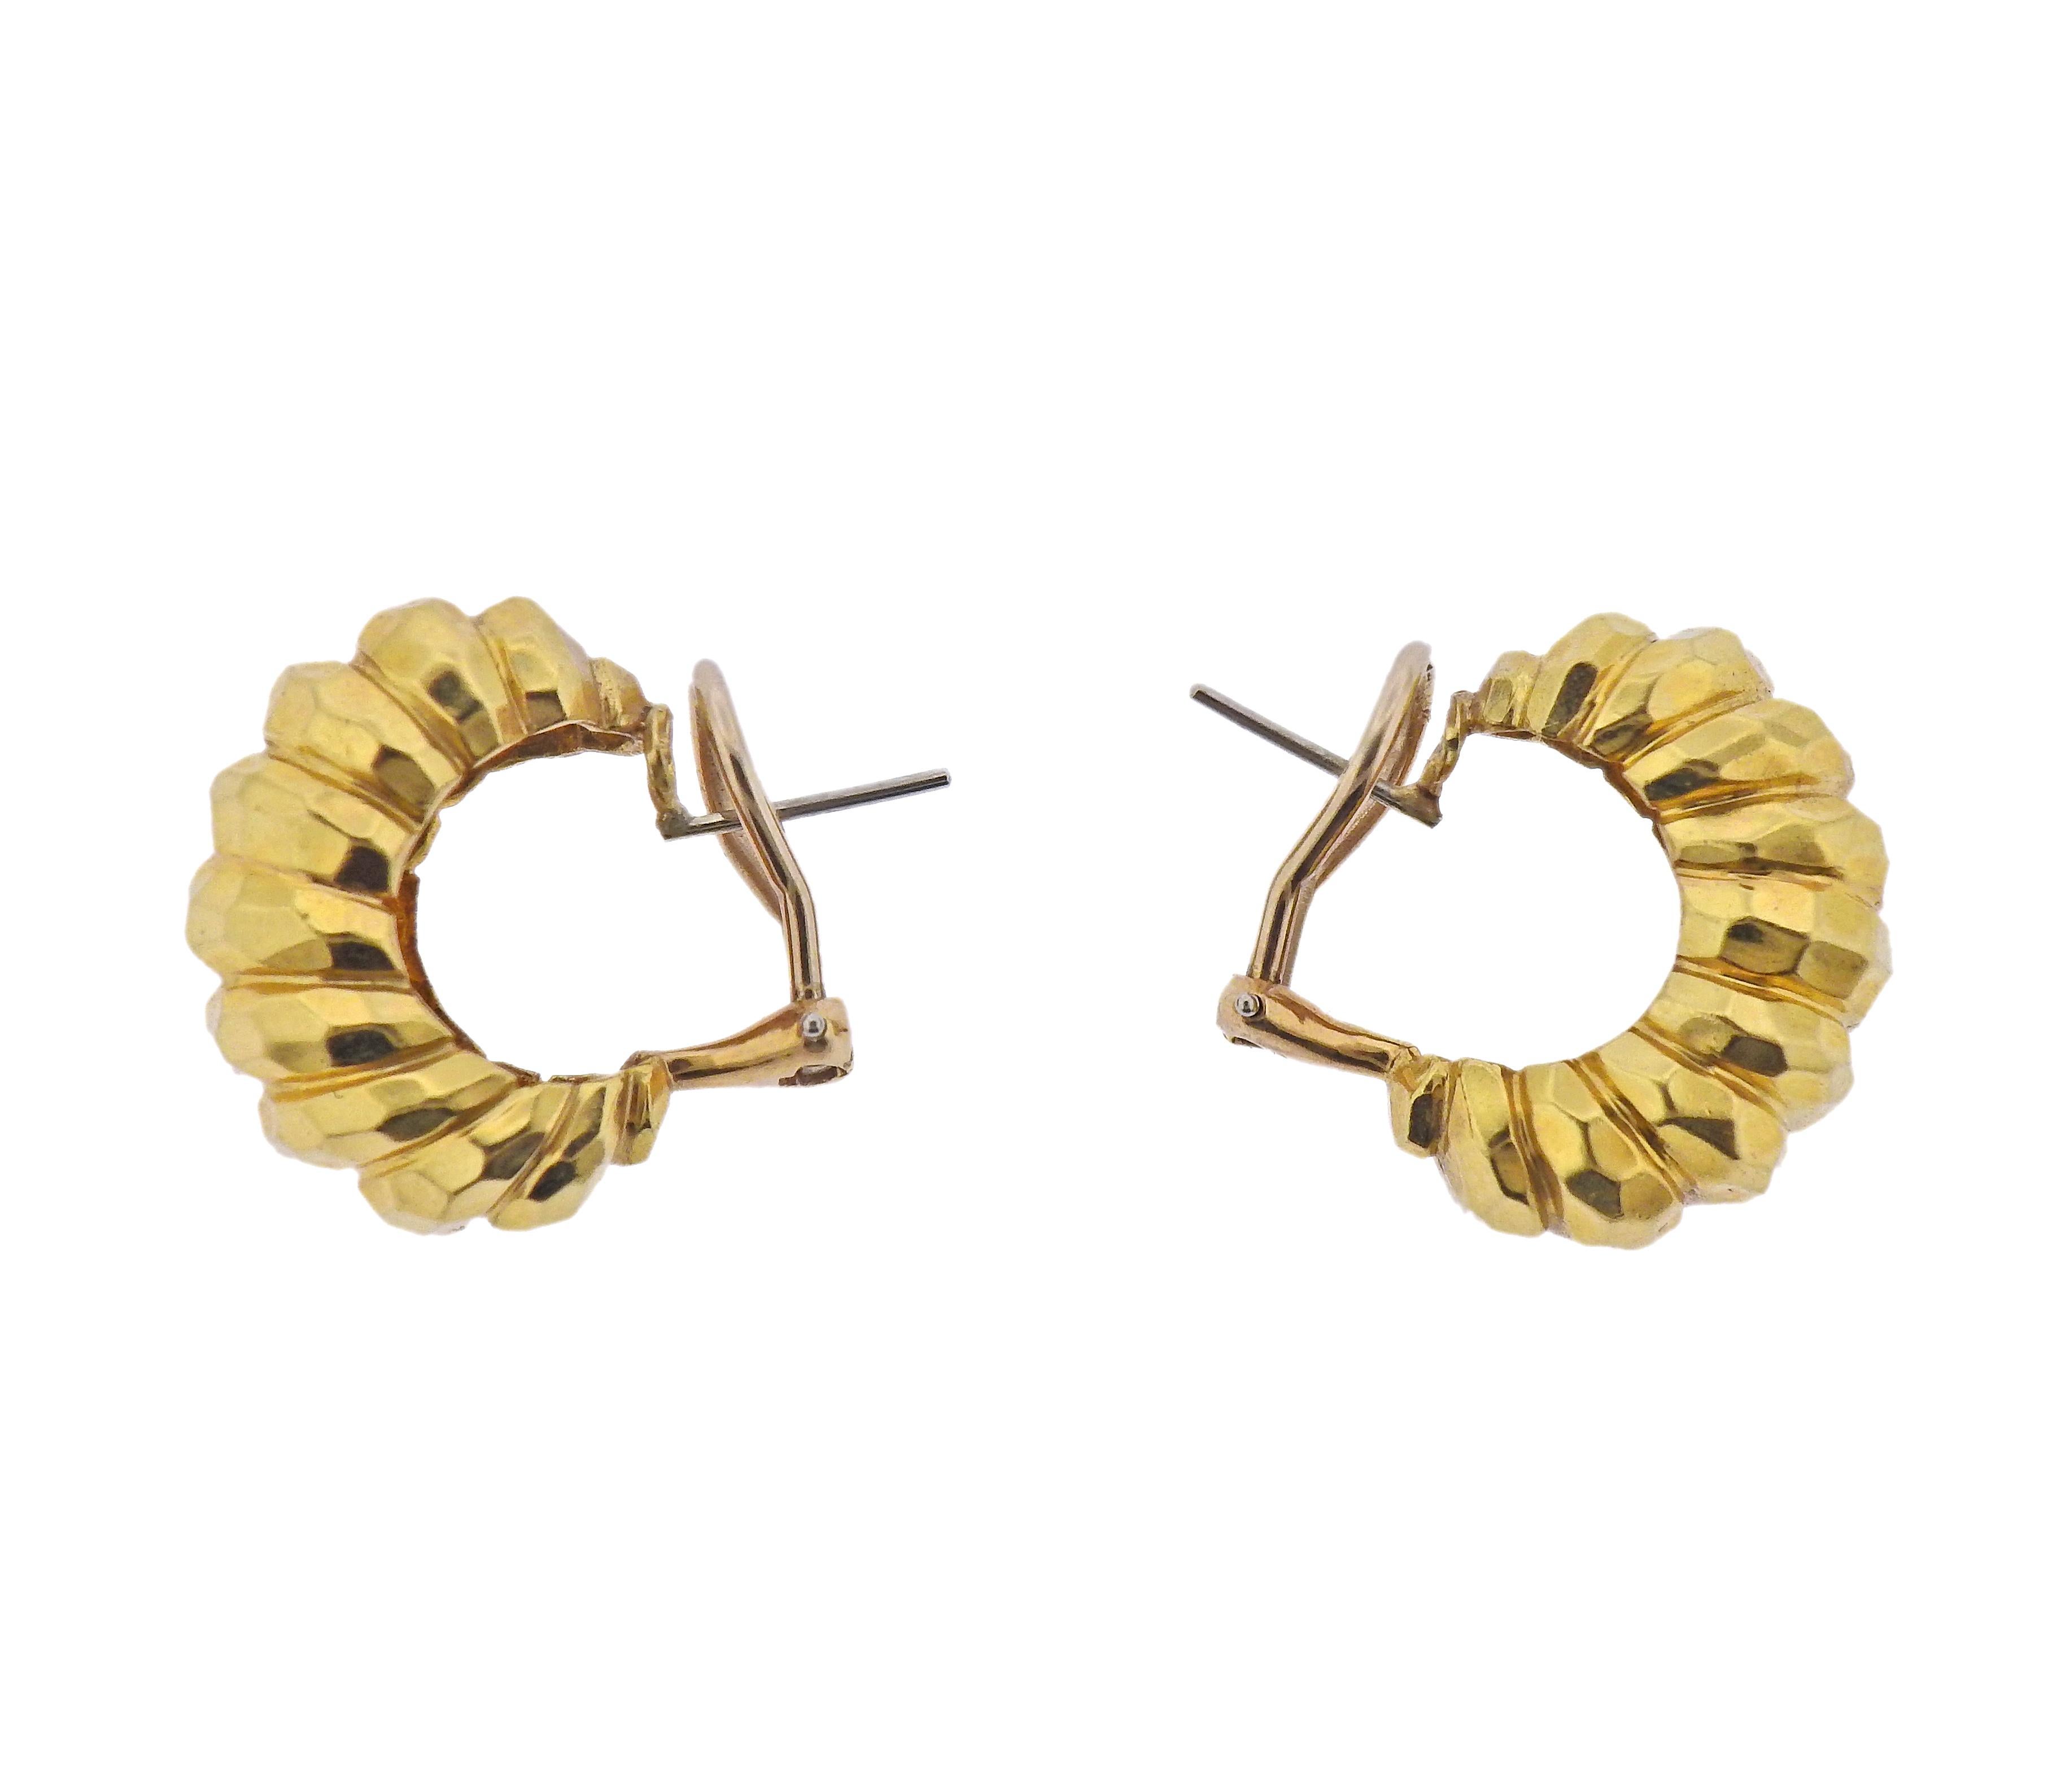 Pair of 18k yellow hammered finish gold earrings by Henry Dunay. Earrings are 23mm x 11mm. Marked: 18K, Dunay. Weight - 14.9 grams.